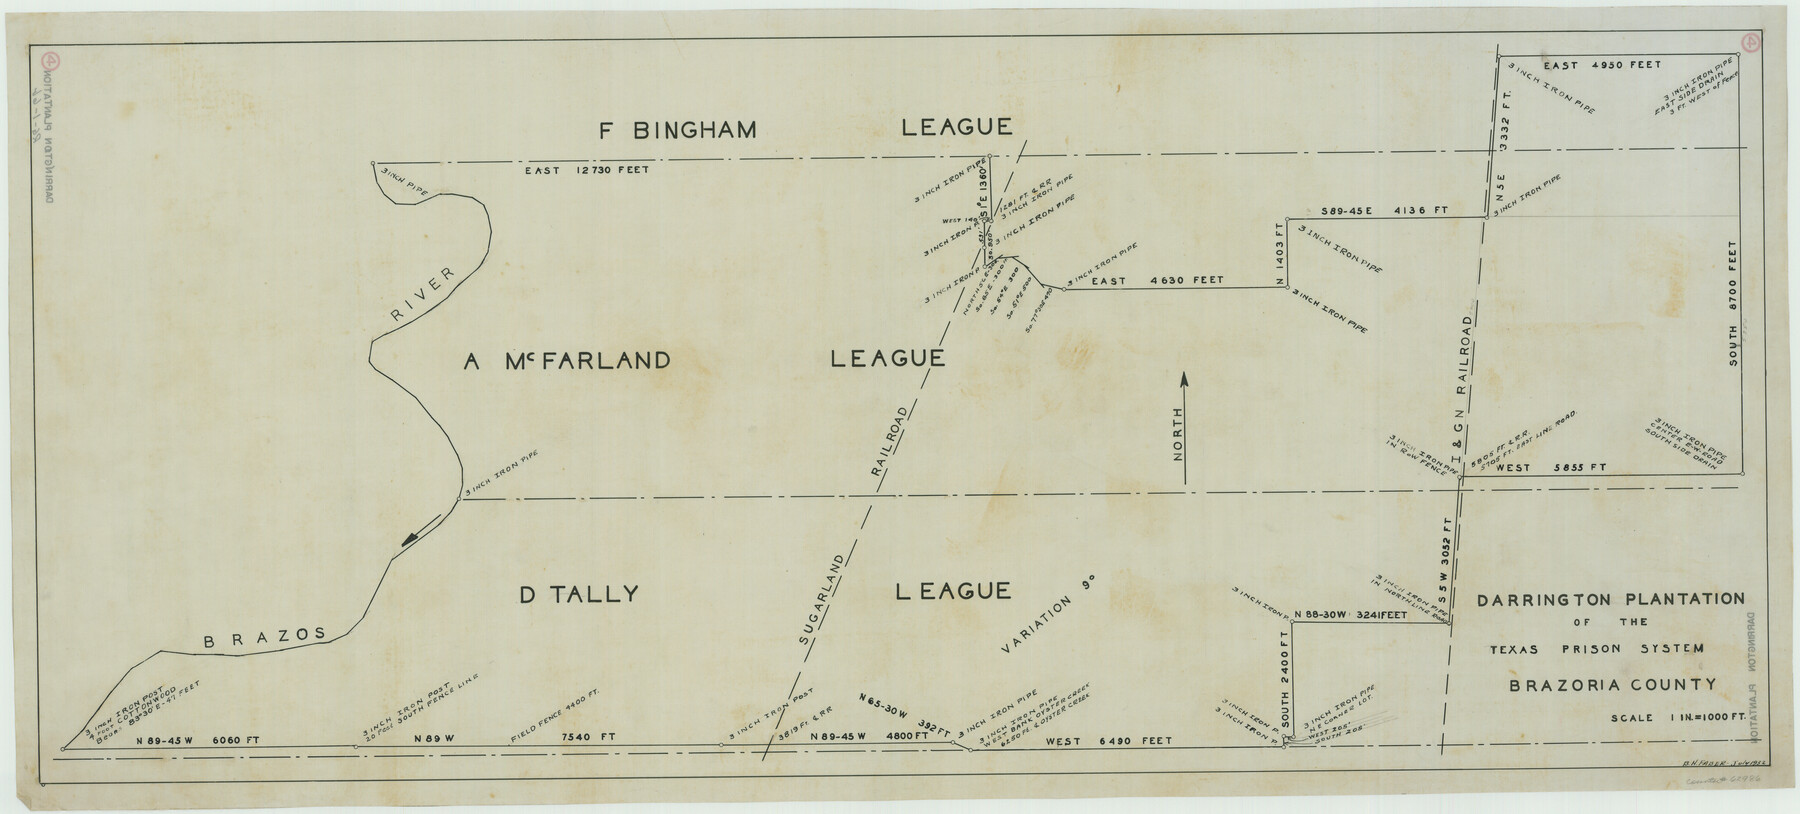 62986, Darrington Plantation of the Texas Prison System, Brazoria County, General Map Collection